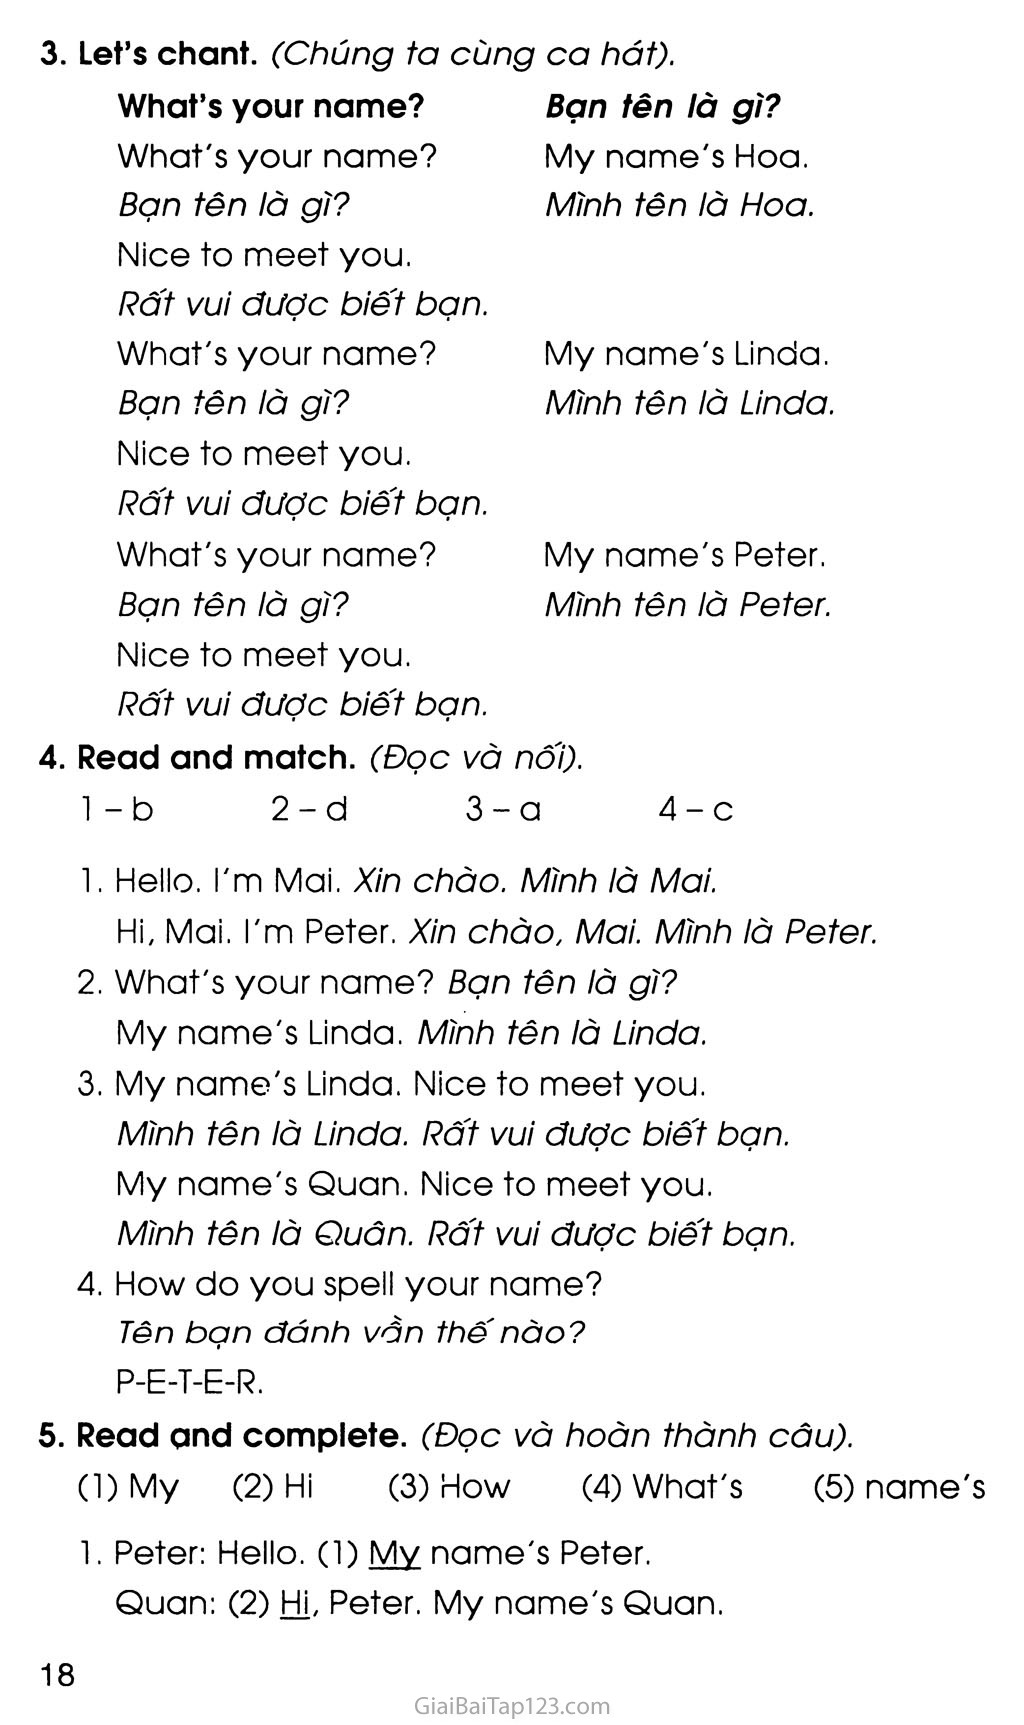 UNIT 2: WHAT’S YOUR NAME? trang 7